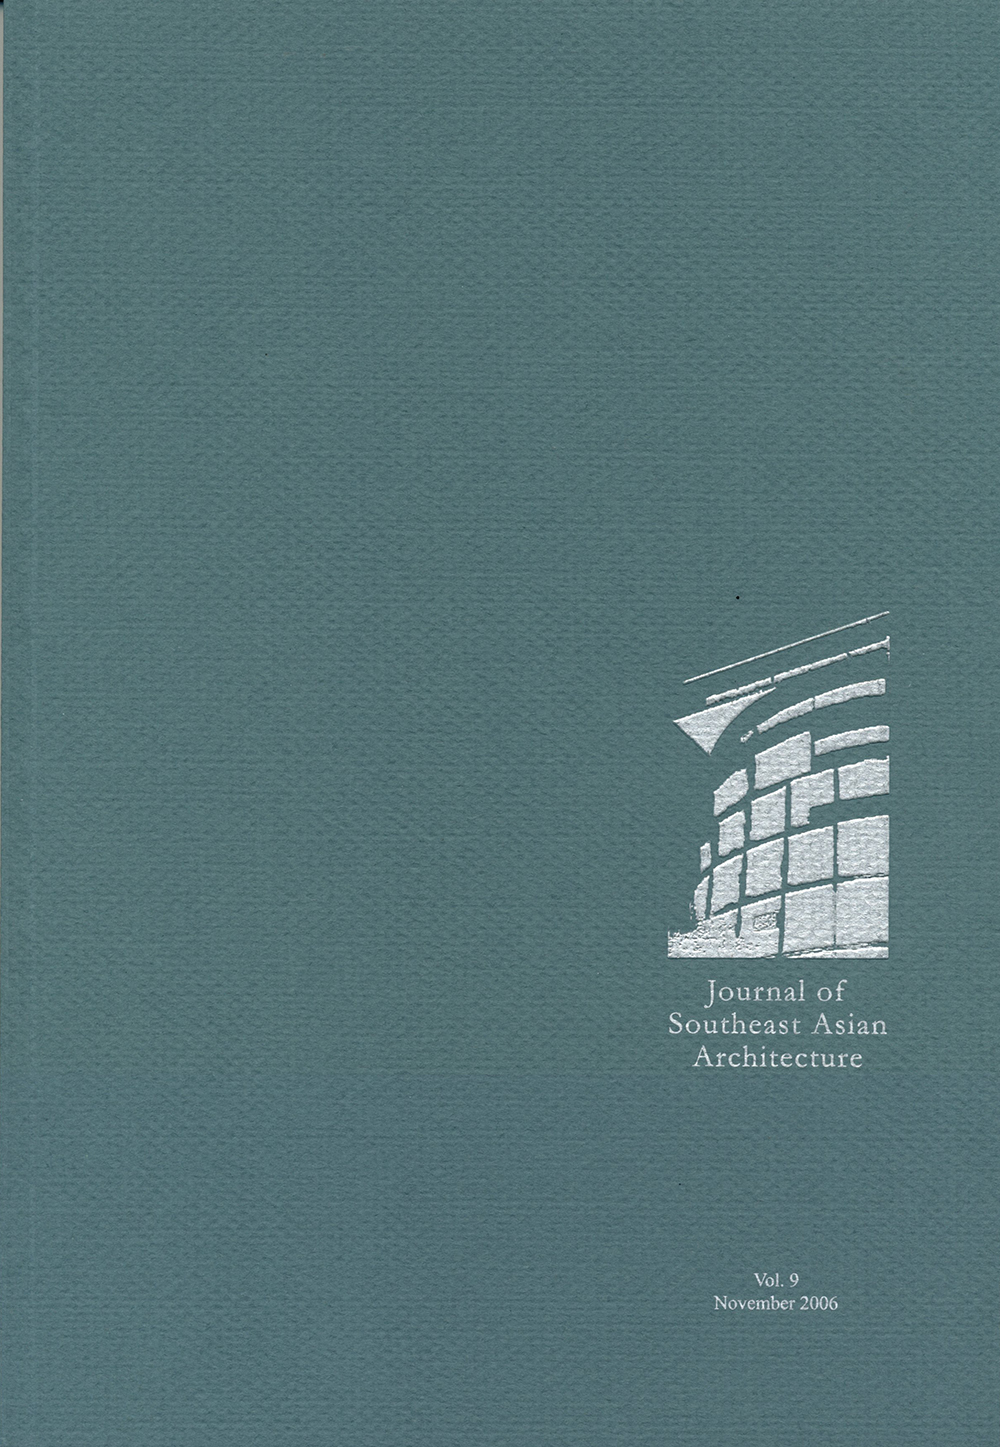 Journal of Southeast Asian Architecture (Volume 9)